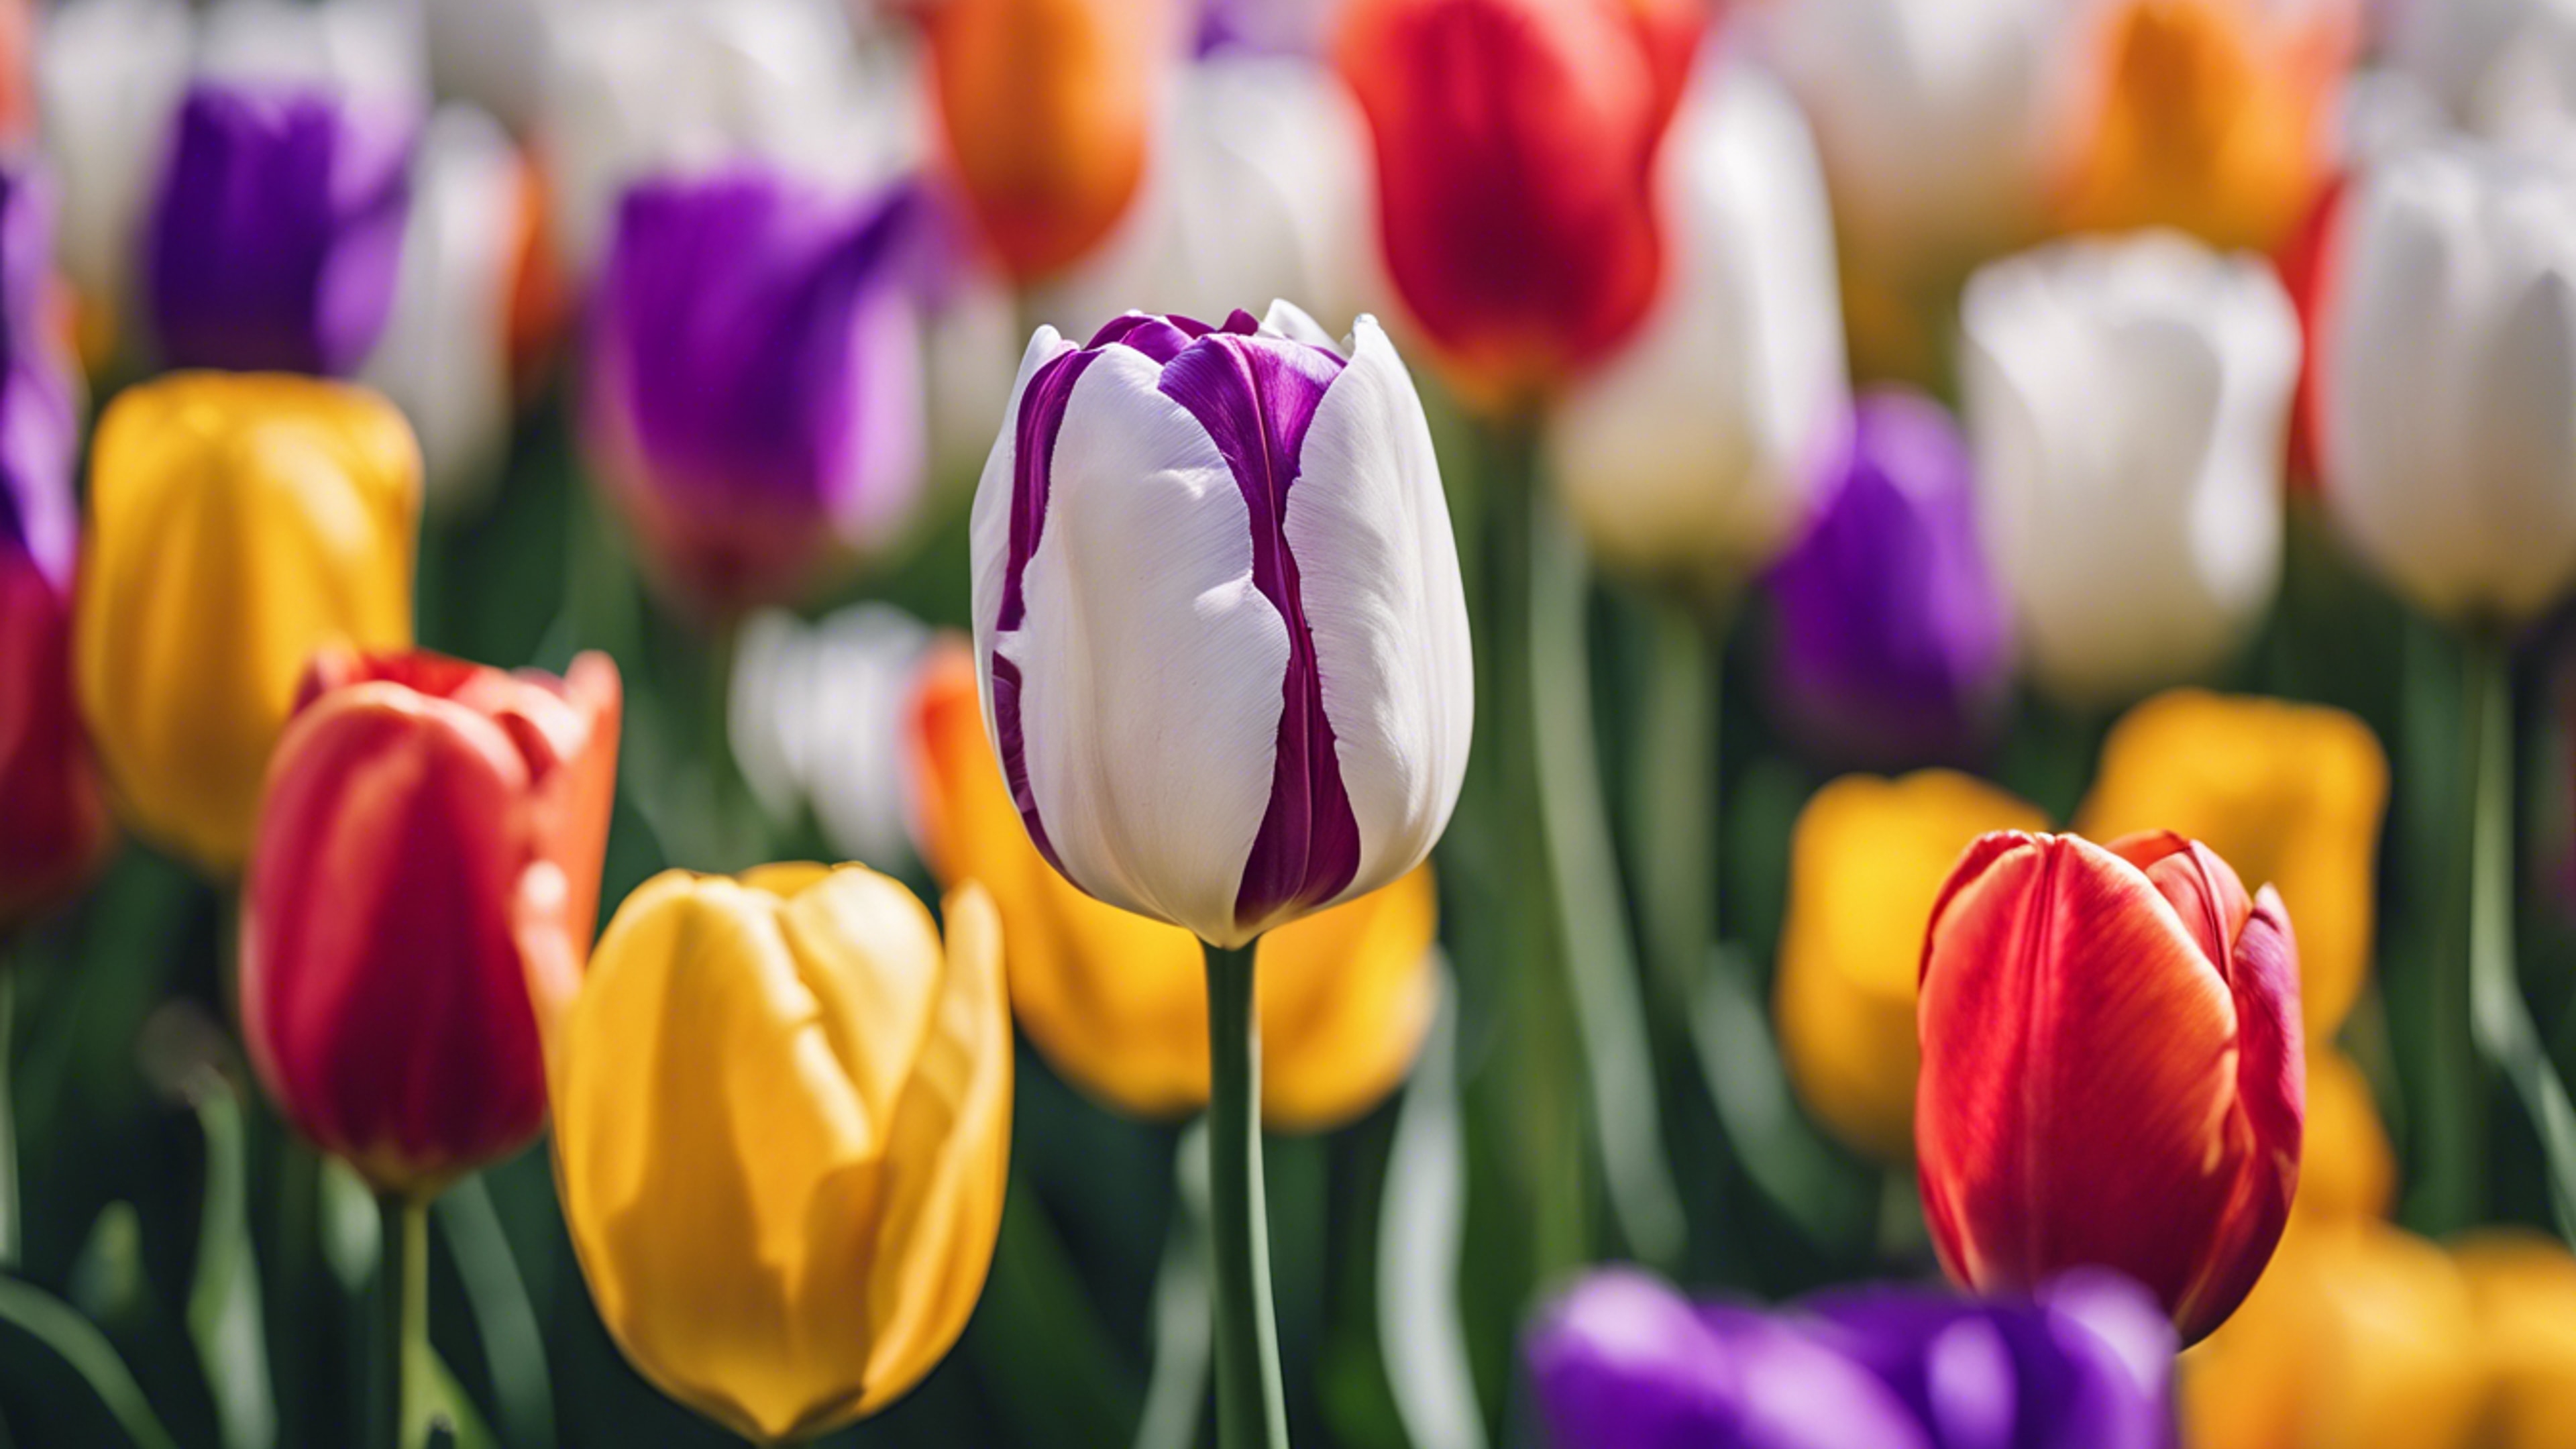 A vibrant rainbow-colored tulip standing out in a field of white tulips. Wallpaper[34428148153c4e00888d]